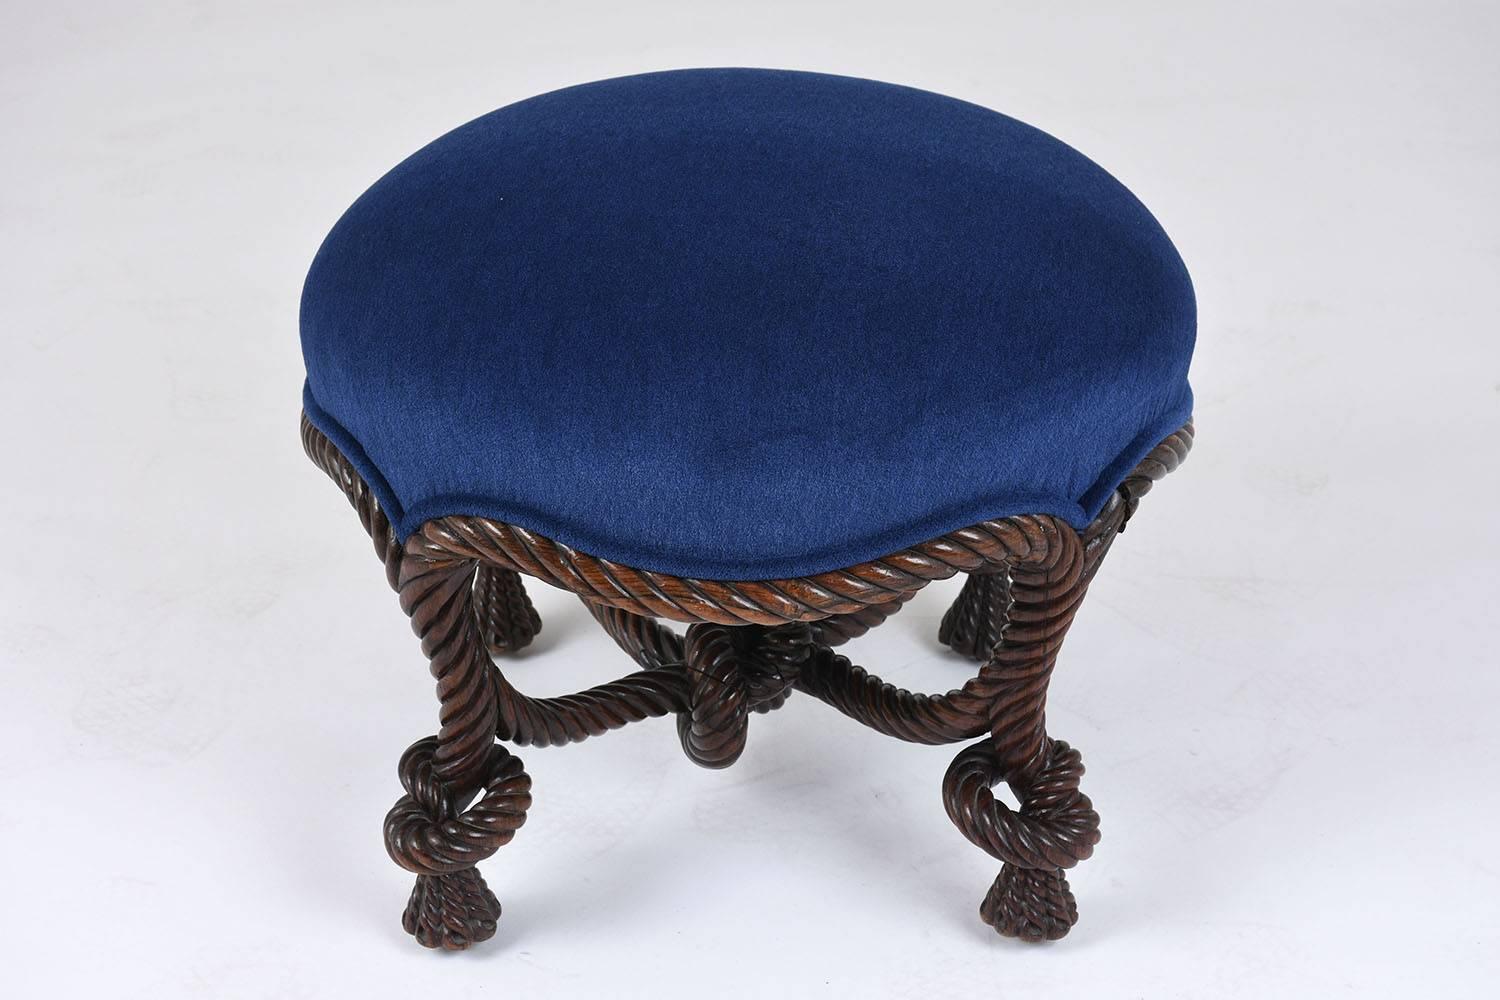 Carved Mid-19th Century Louis XVI style Ottoman or Stool